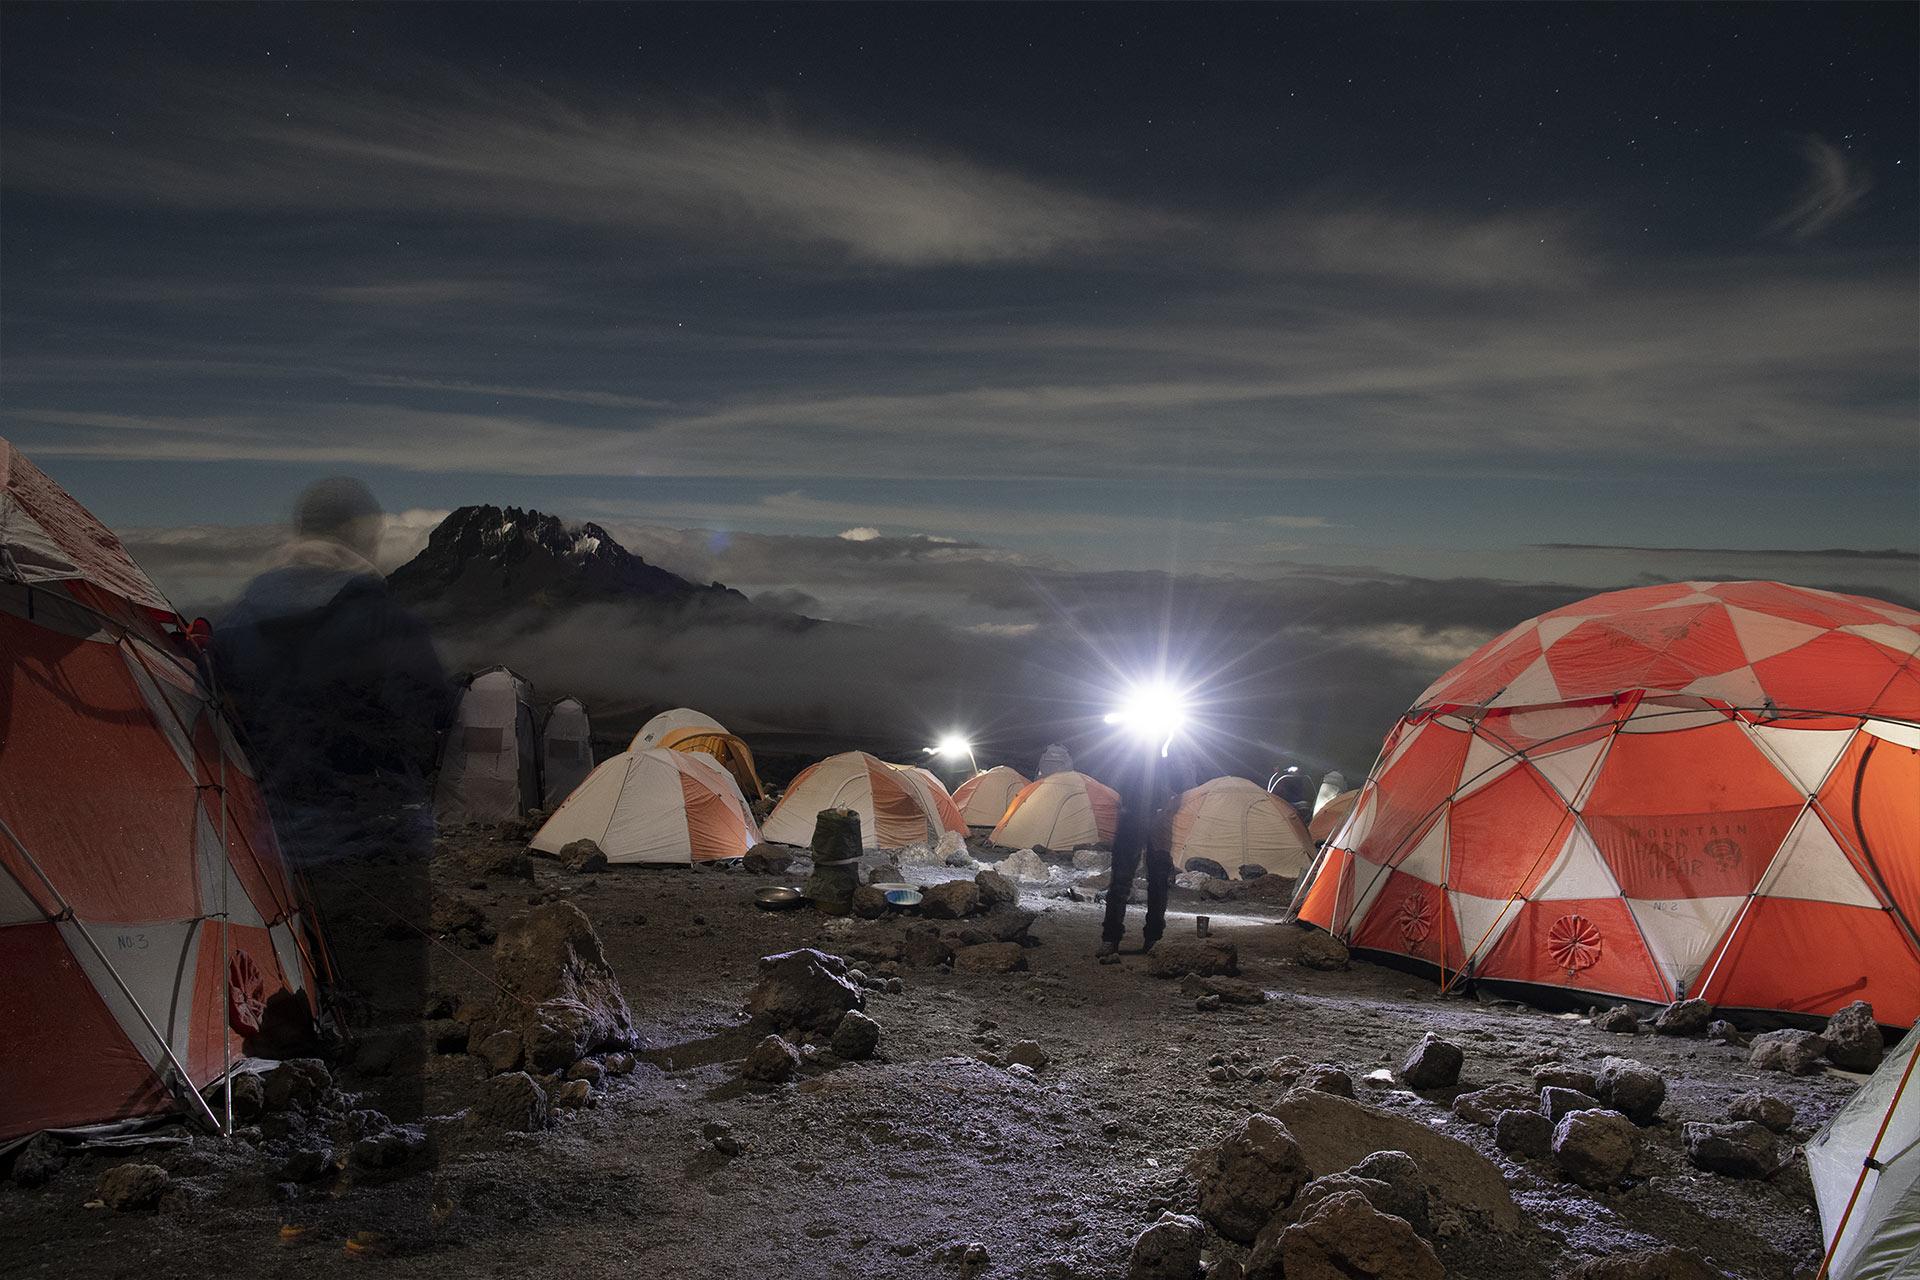 There are seven established routes on Kilimanjaro. The more remote the route the better your journey and experience during the climb